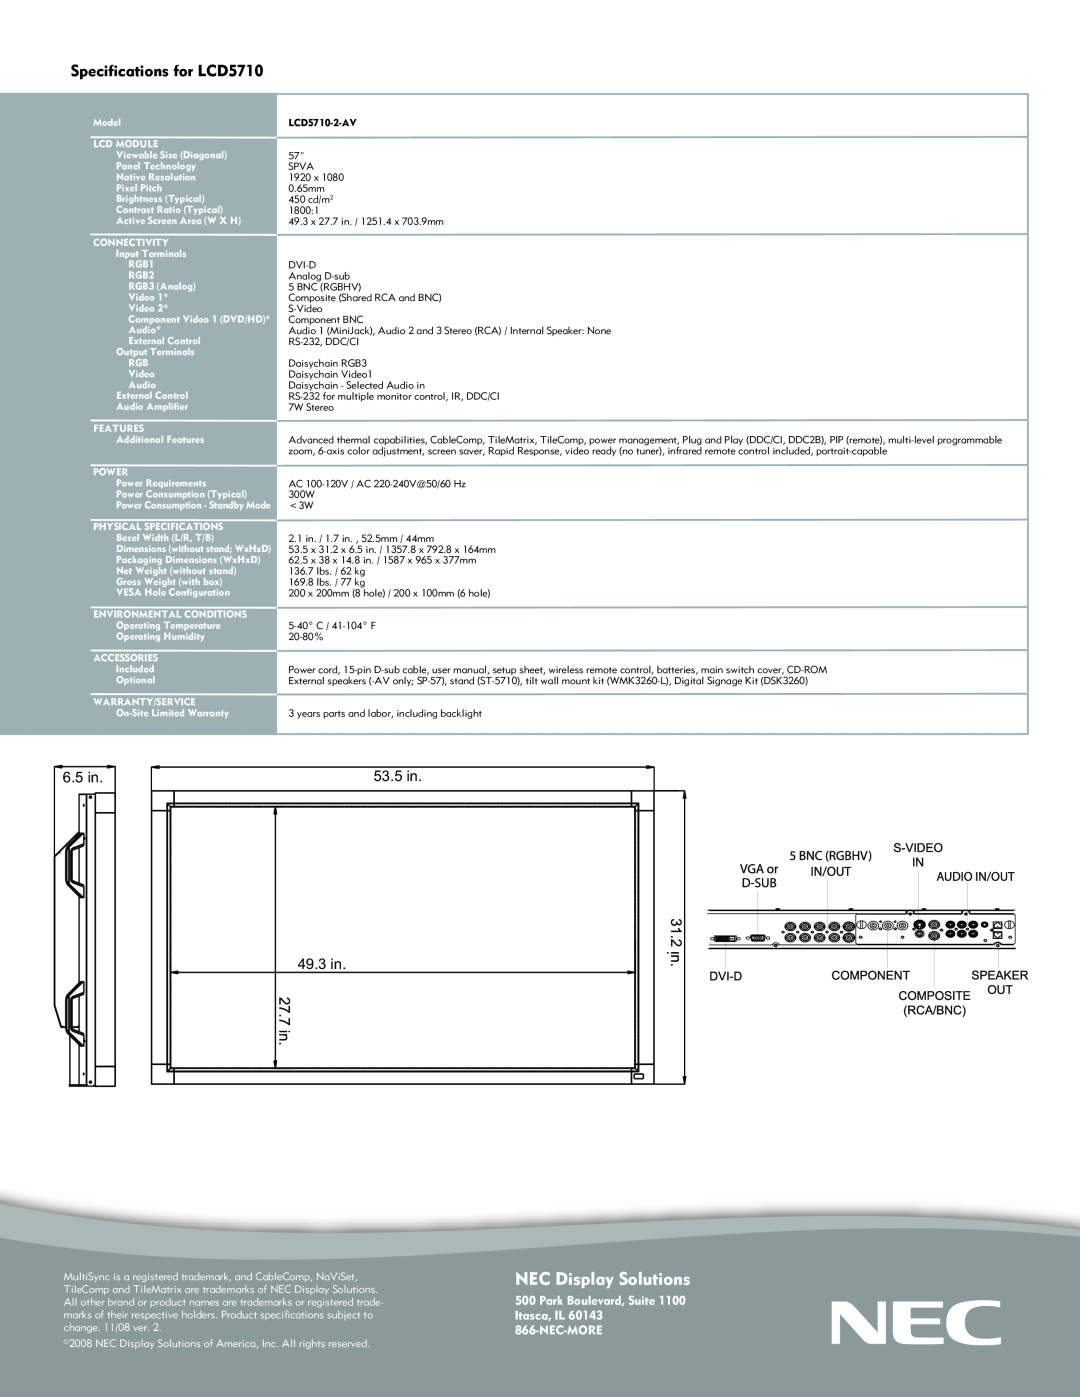 NEC manual NEC Display Solutions, Specifications for LCD5710, Park Boulevard, Suite Itasca, IL 866-NEC-MORE 